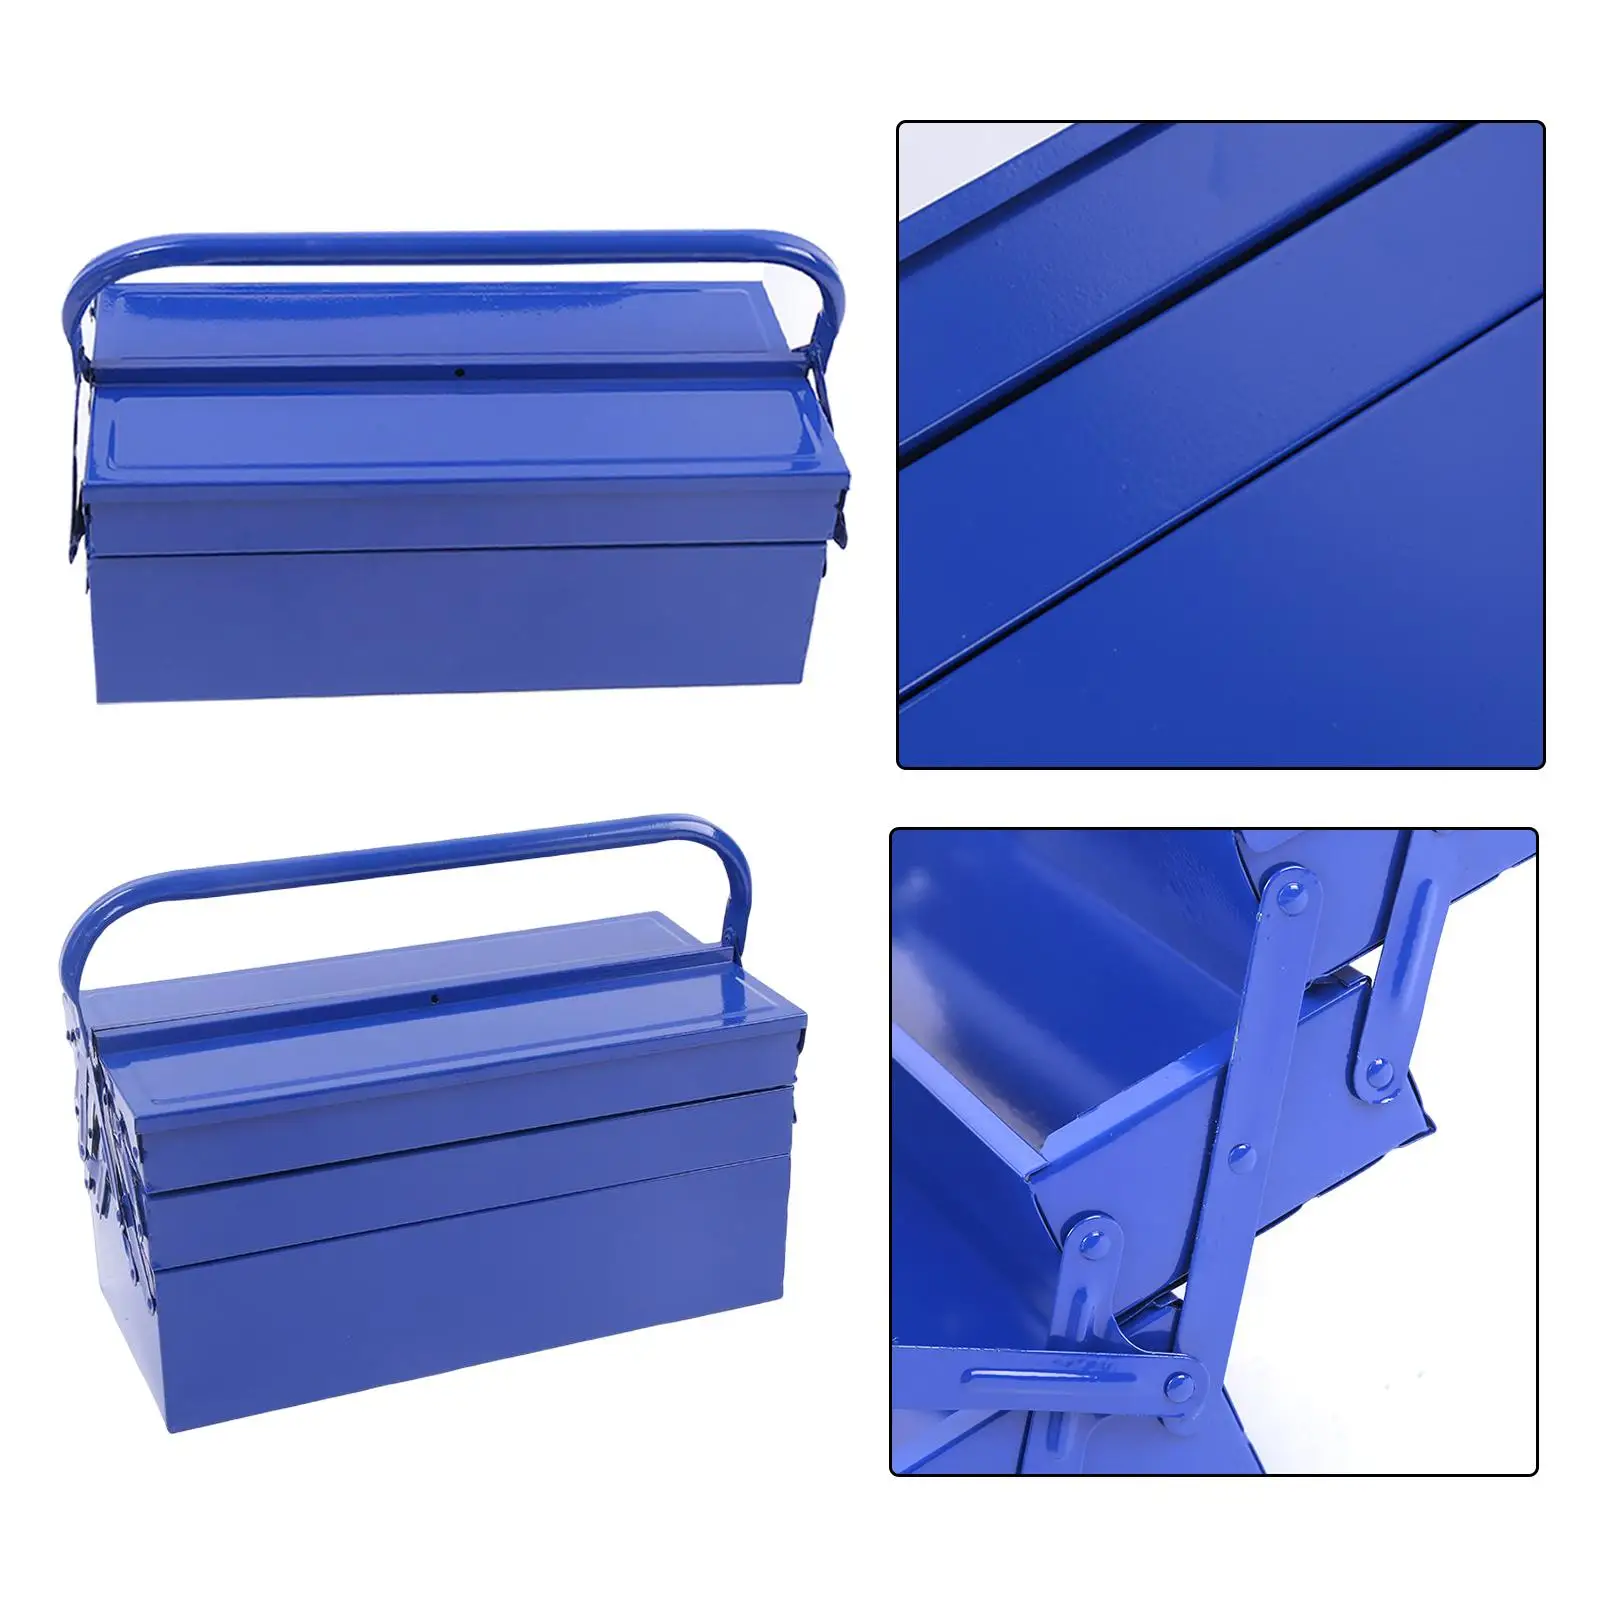 Toolbox Storage Box Durable Lightweight Multifunction Strong Large Space Carrying Case Drawer for Warehouse Car Garage